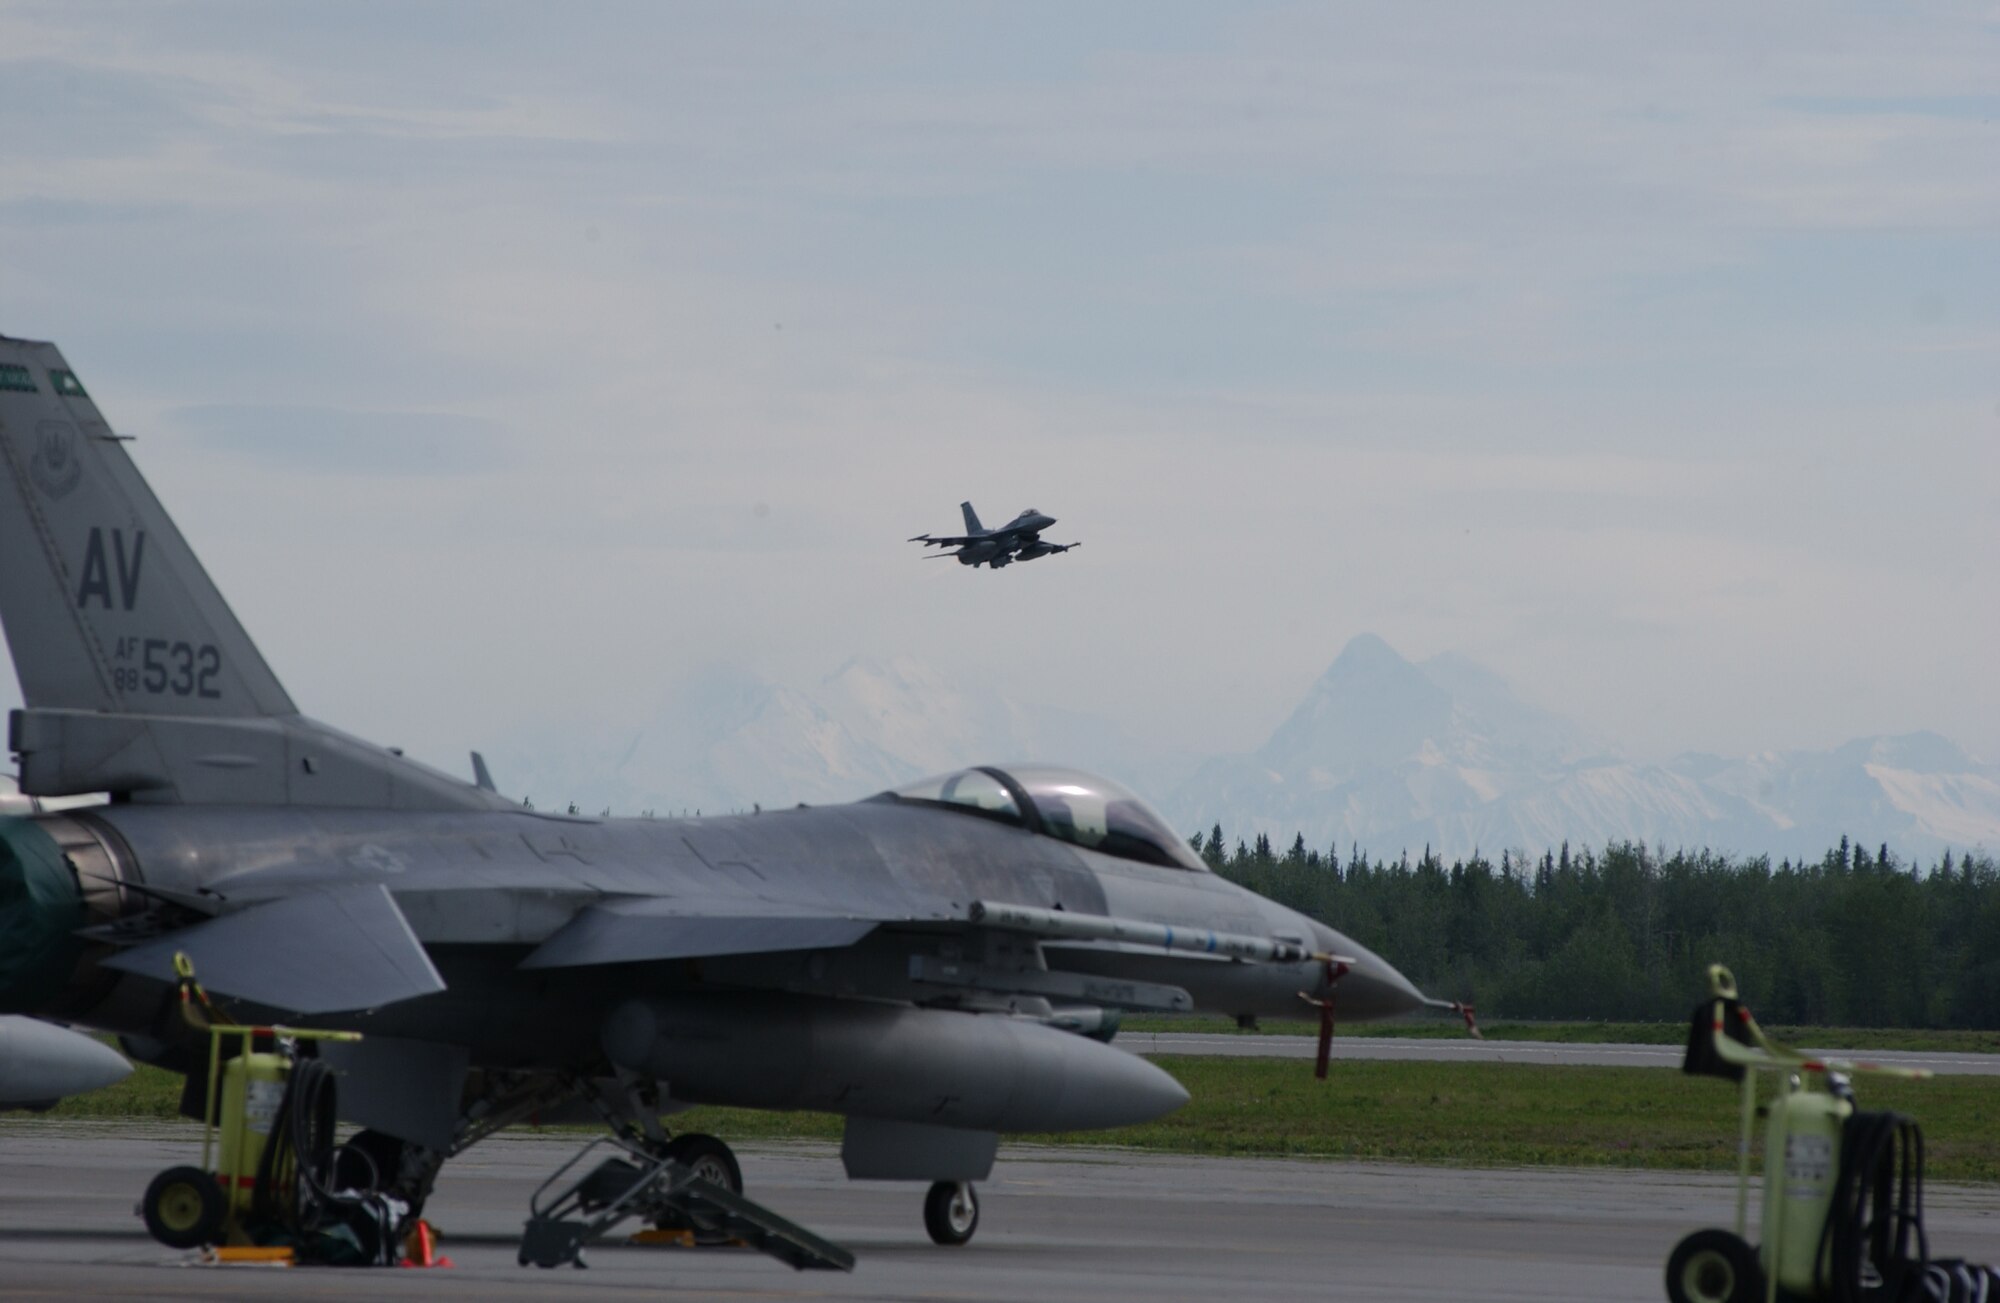 EIELSON AIR FORCE BASE, Alaska -- An F-16 Fighting Falcon, 555th Fighter Squadron, Aviano Air Base, Italy, takes off for a mission for Red Flag-Alaska 07-2 June 4 here. RF-A 07-2 is a Pacific Air Forces-directed field training exercise for U.S. and coalition forces flown under simulated air-combat conditions. It is conducted on the Pacific Alaska Range Complex with air operations flown out of Eielson and Elmendorf Air Force Bases.  (U.S. Air Force Photo by Airman 1st Class Jonathan Snyder)